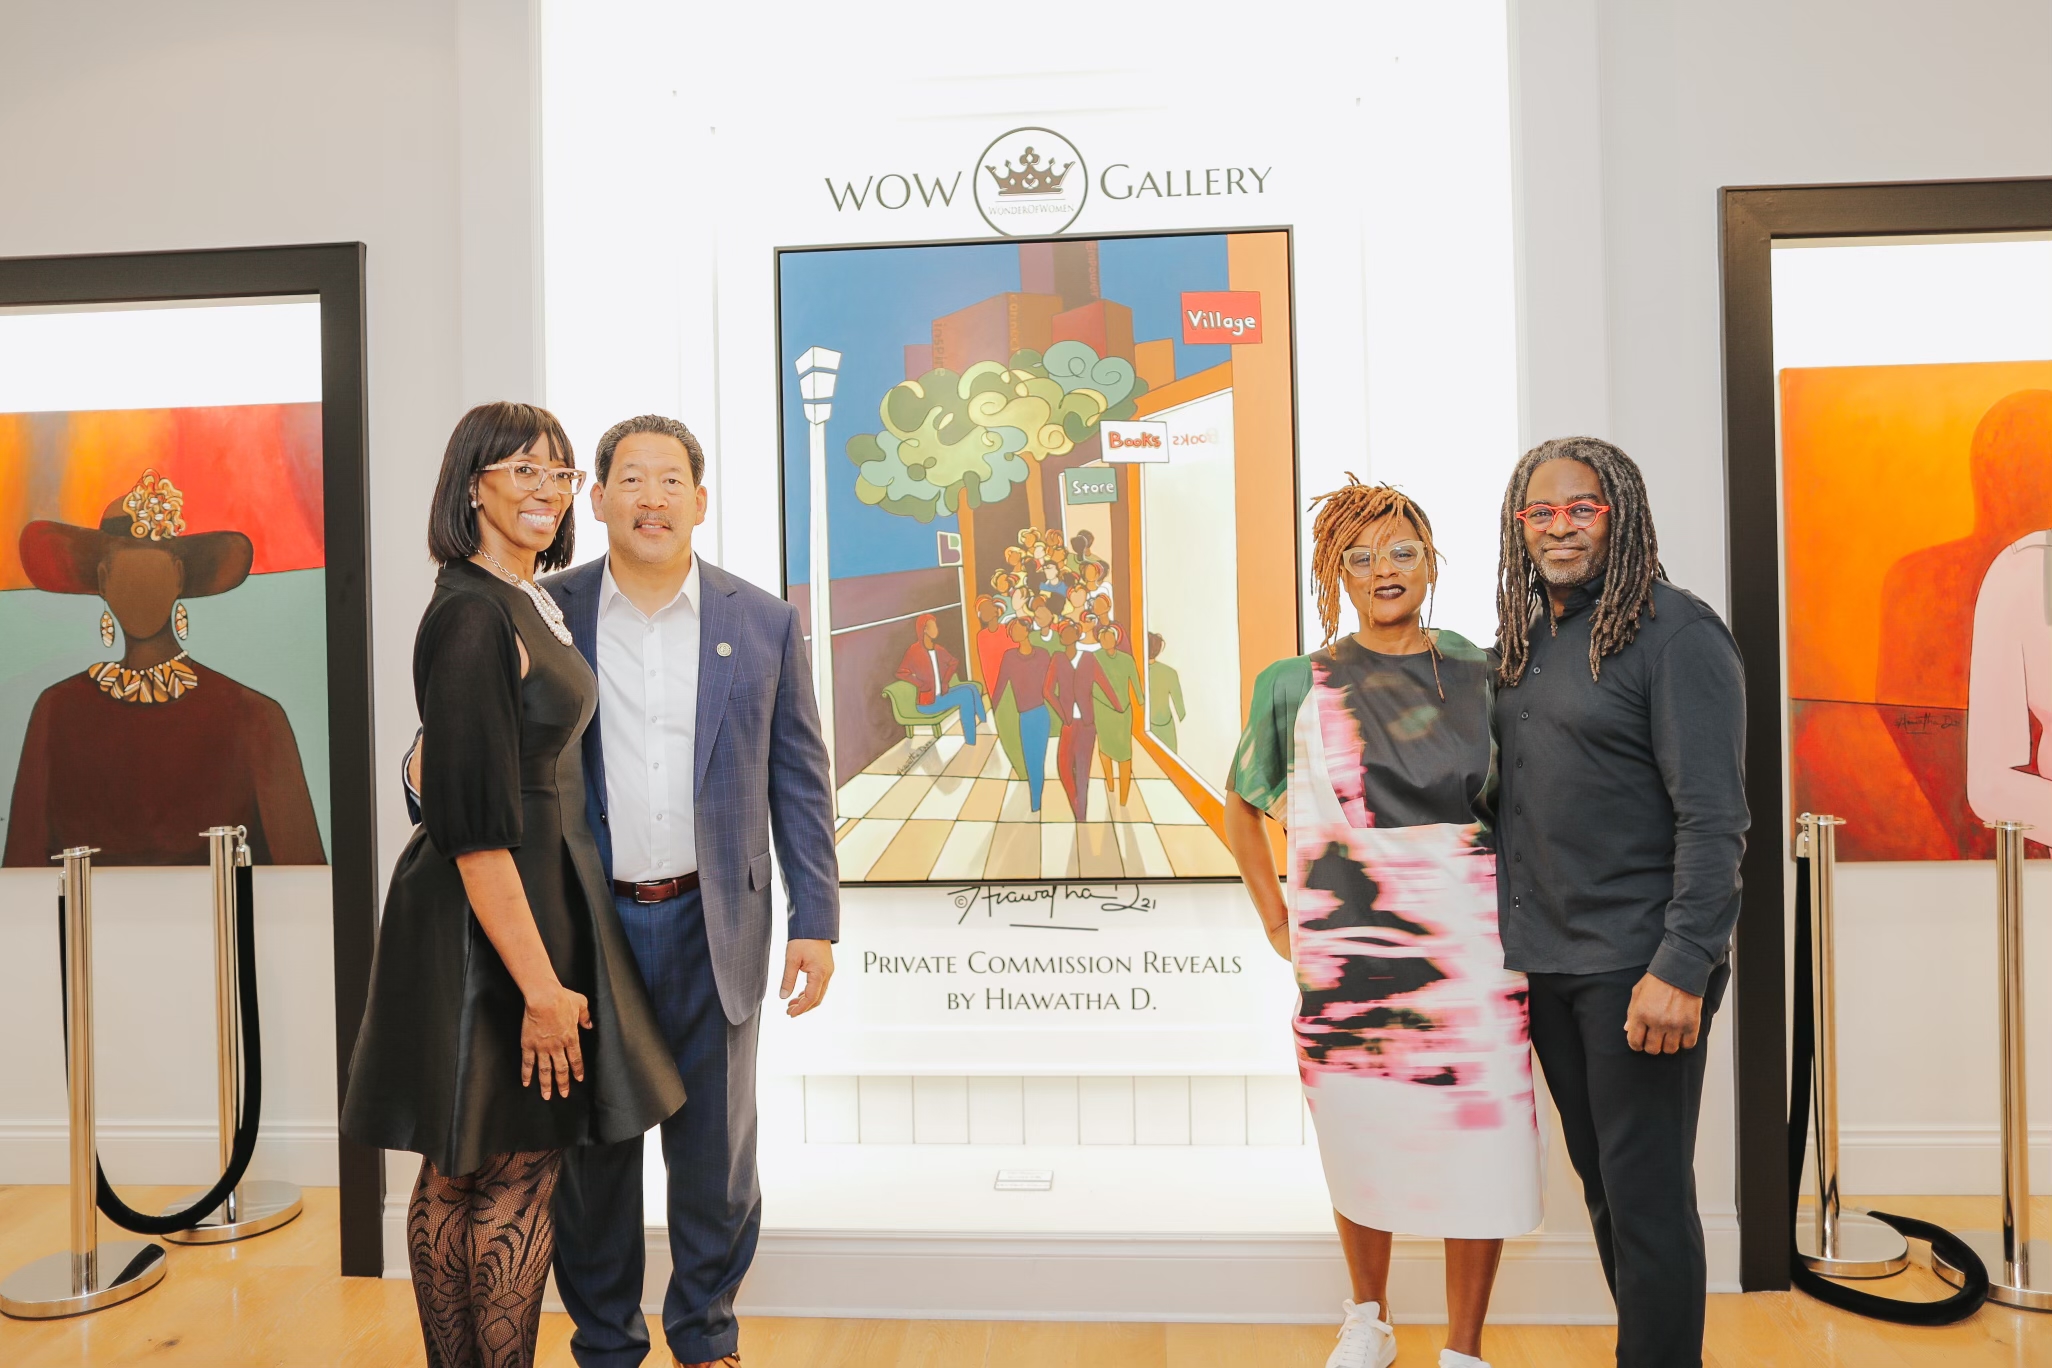 Alonda Williams, Big Brothers Big Sisters of Puget Sound President & CEO stands to the left of Seattle Mayor Bruce Harrell. In the center, the unveiled painting, BIG Futures, is mounted to the gallery wall. To the right of the painting stand WOW Gallery founder Veronica Very and renowned local artist Hiawatha D.